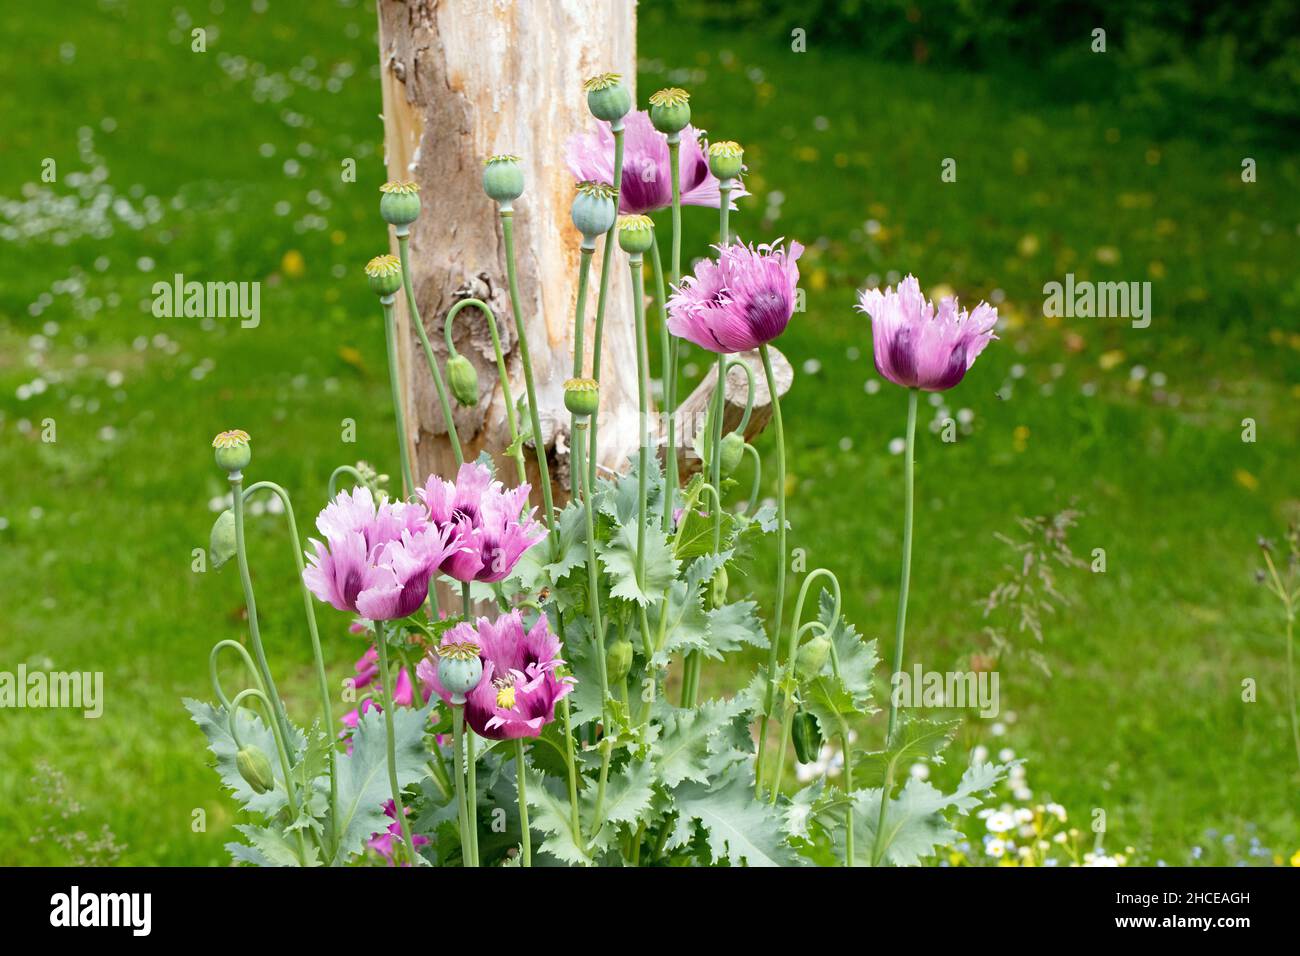 Opium Poppy (Papaver somniferum). Cultivated Garden escape, grown widely central Europe, Showy large, flowers, make it a popular ornamental  plant, as Stock Photo